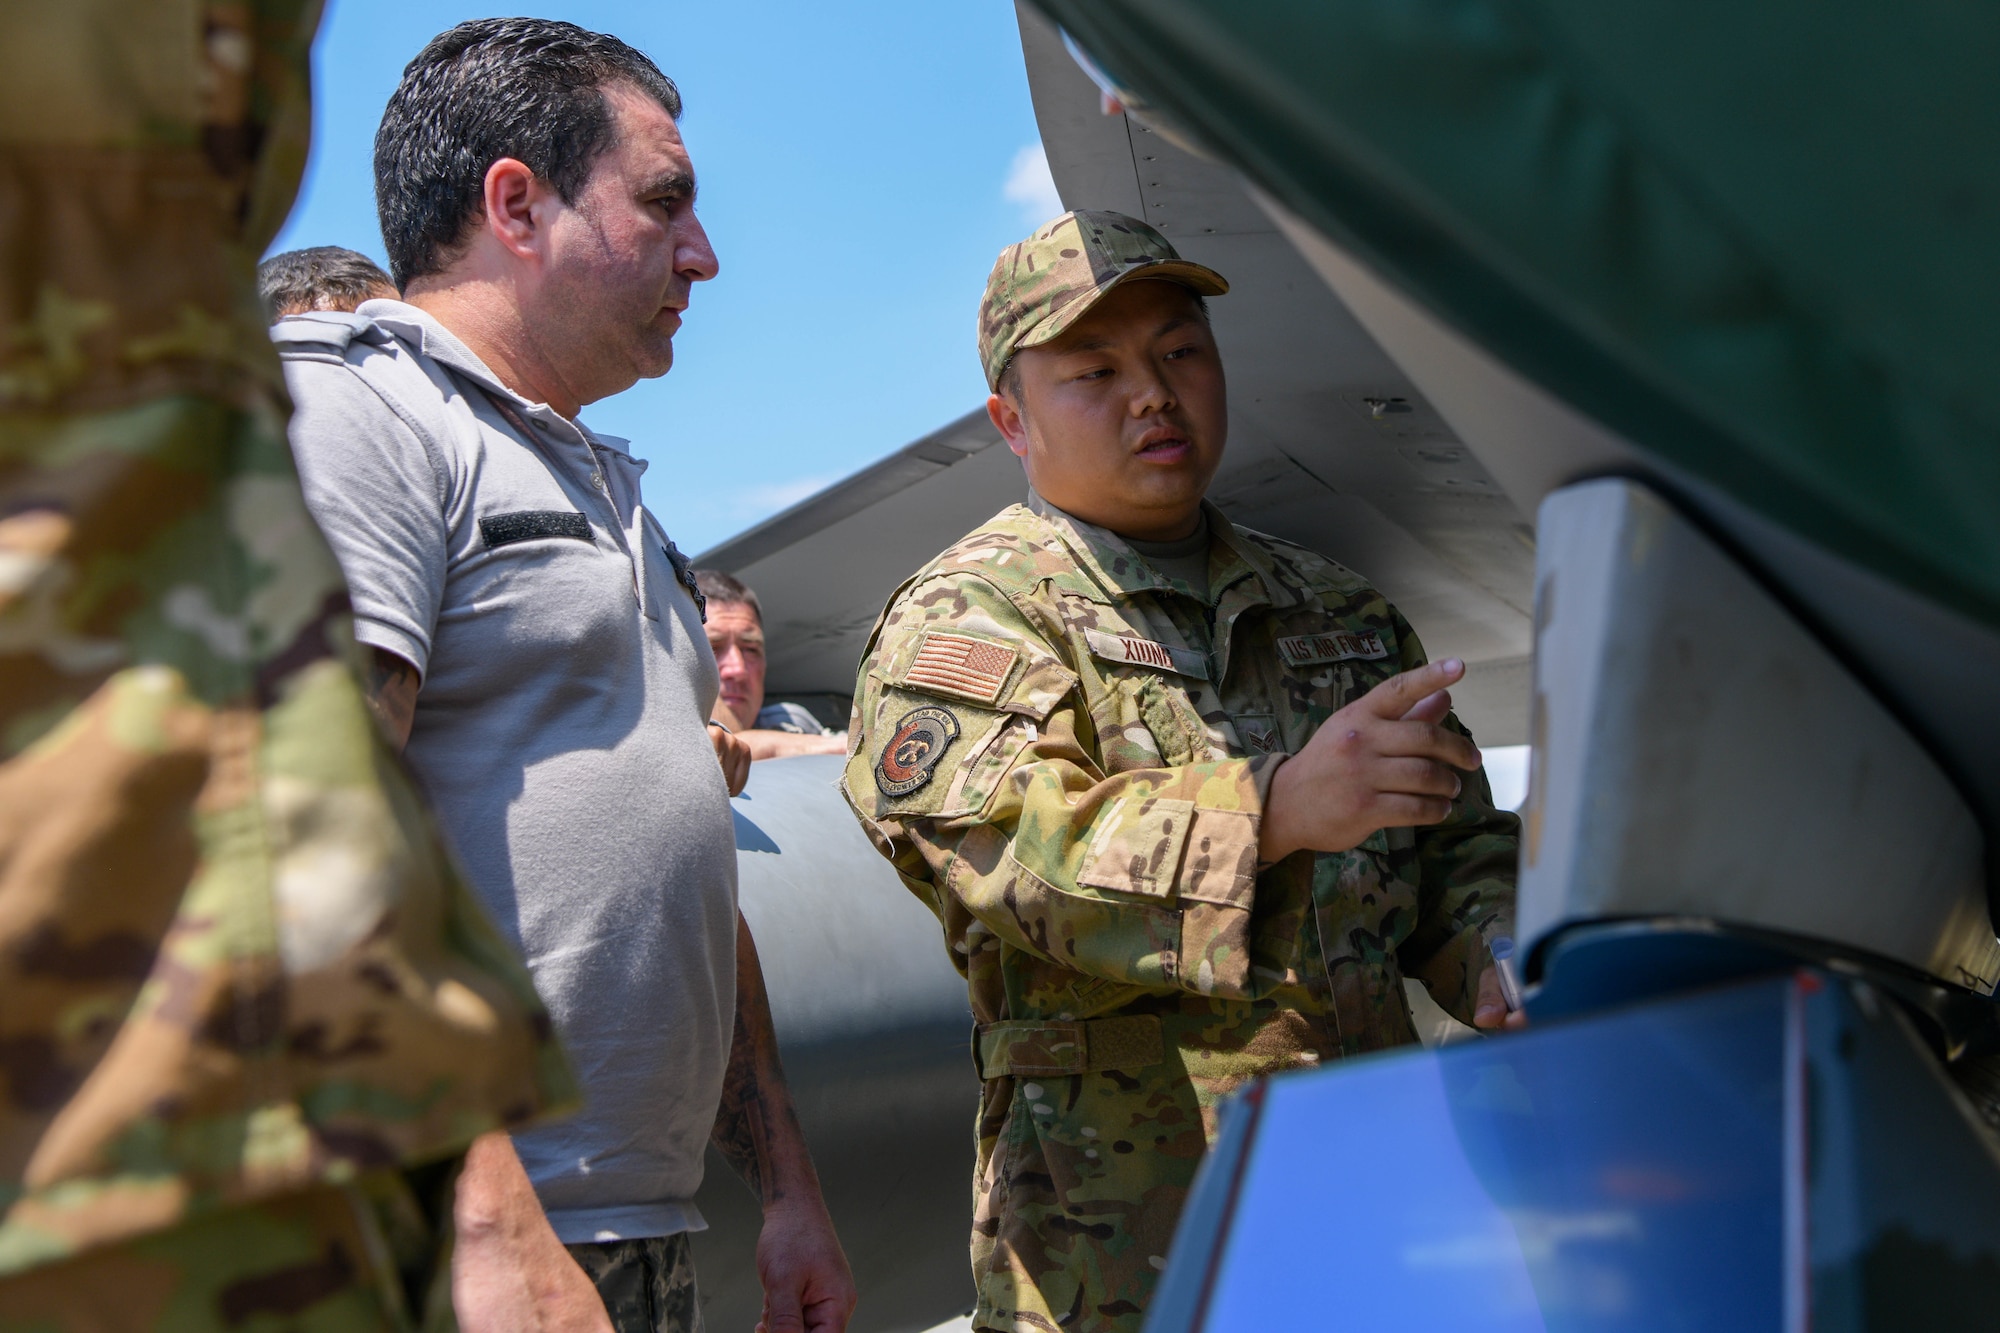 Senior Airman James Xiong, 31st Civil Engineer Squadron fire department driver operator, right, teaches Bulgarian air force members F-16 Fighting Falcon emergency response procedures during exercise Thracian Star 21 at Graf Ingatievo Air Base, Bulgaria, July 20, 2021. Participation in Thracian Star 21 offers an opportunity for Airmen to train and hone in on operational and tactical skills. (U.S. Air Force photo by Airman 1st Class Brooke Moeder)